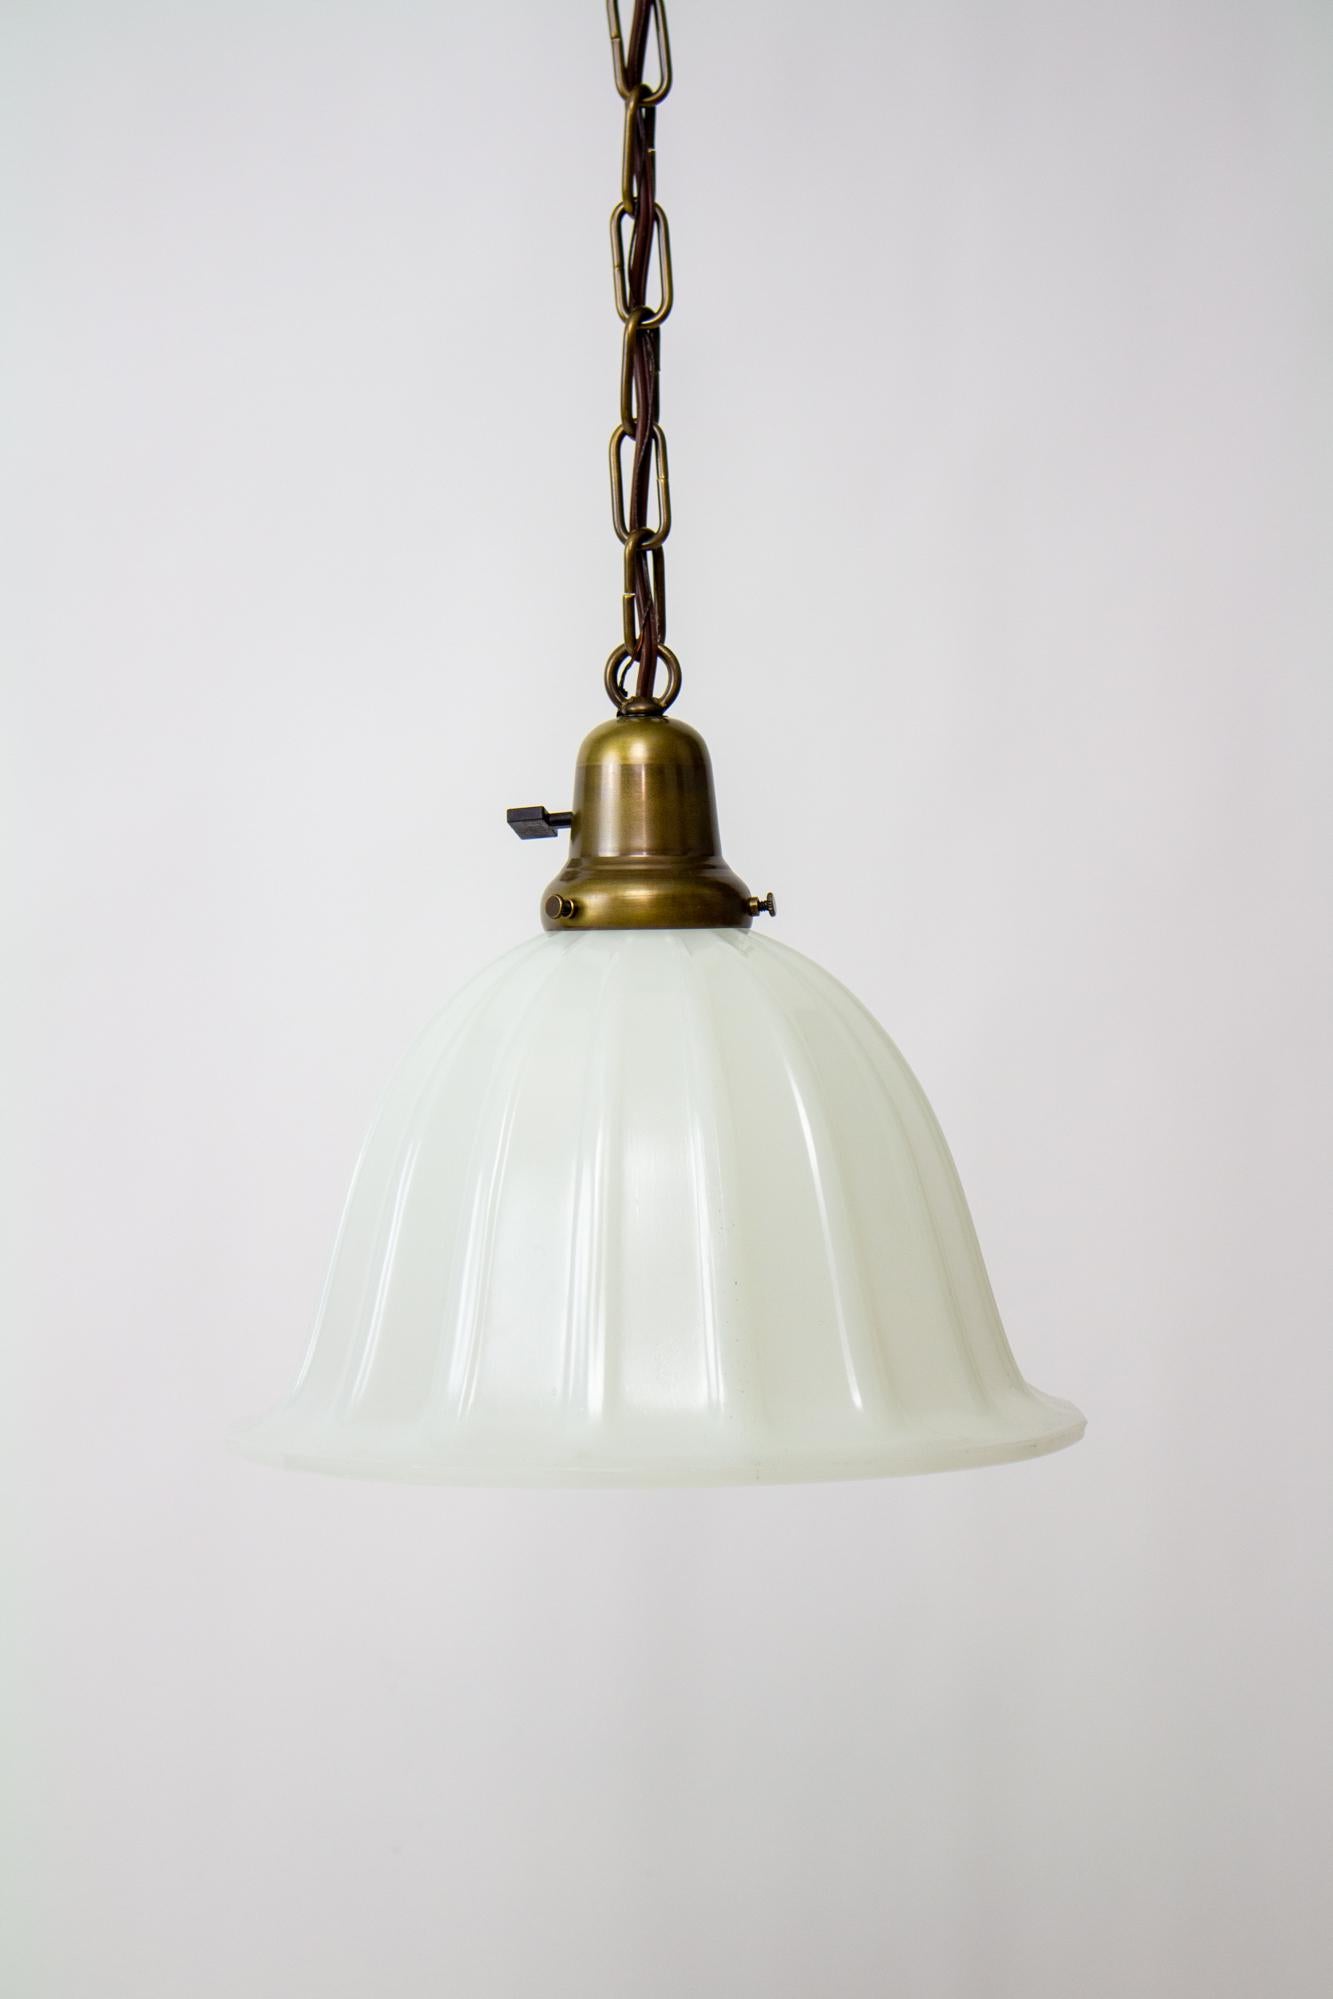 Early 20th Century clambroth glass bell pendant light. Classic brass chain fixture with a single socket. Glass is thick and cast in a bell shape with ribs, it has an opaline translucency, less opaque than milk glass, and with a smooth finish. Glass